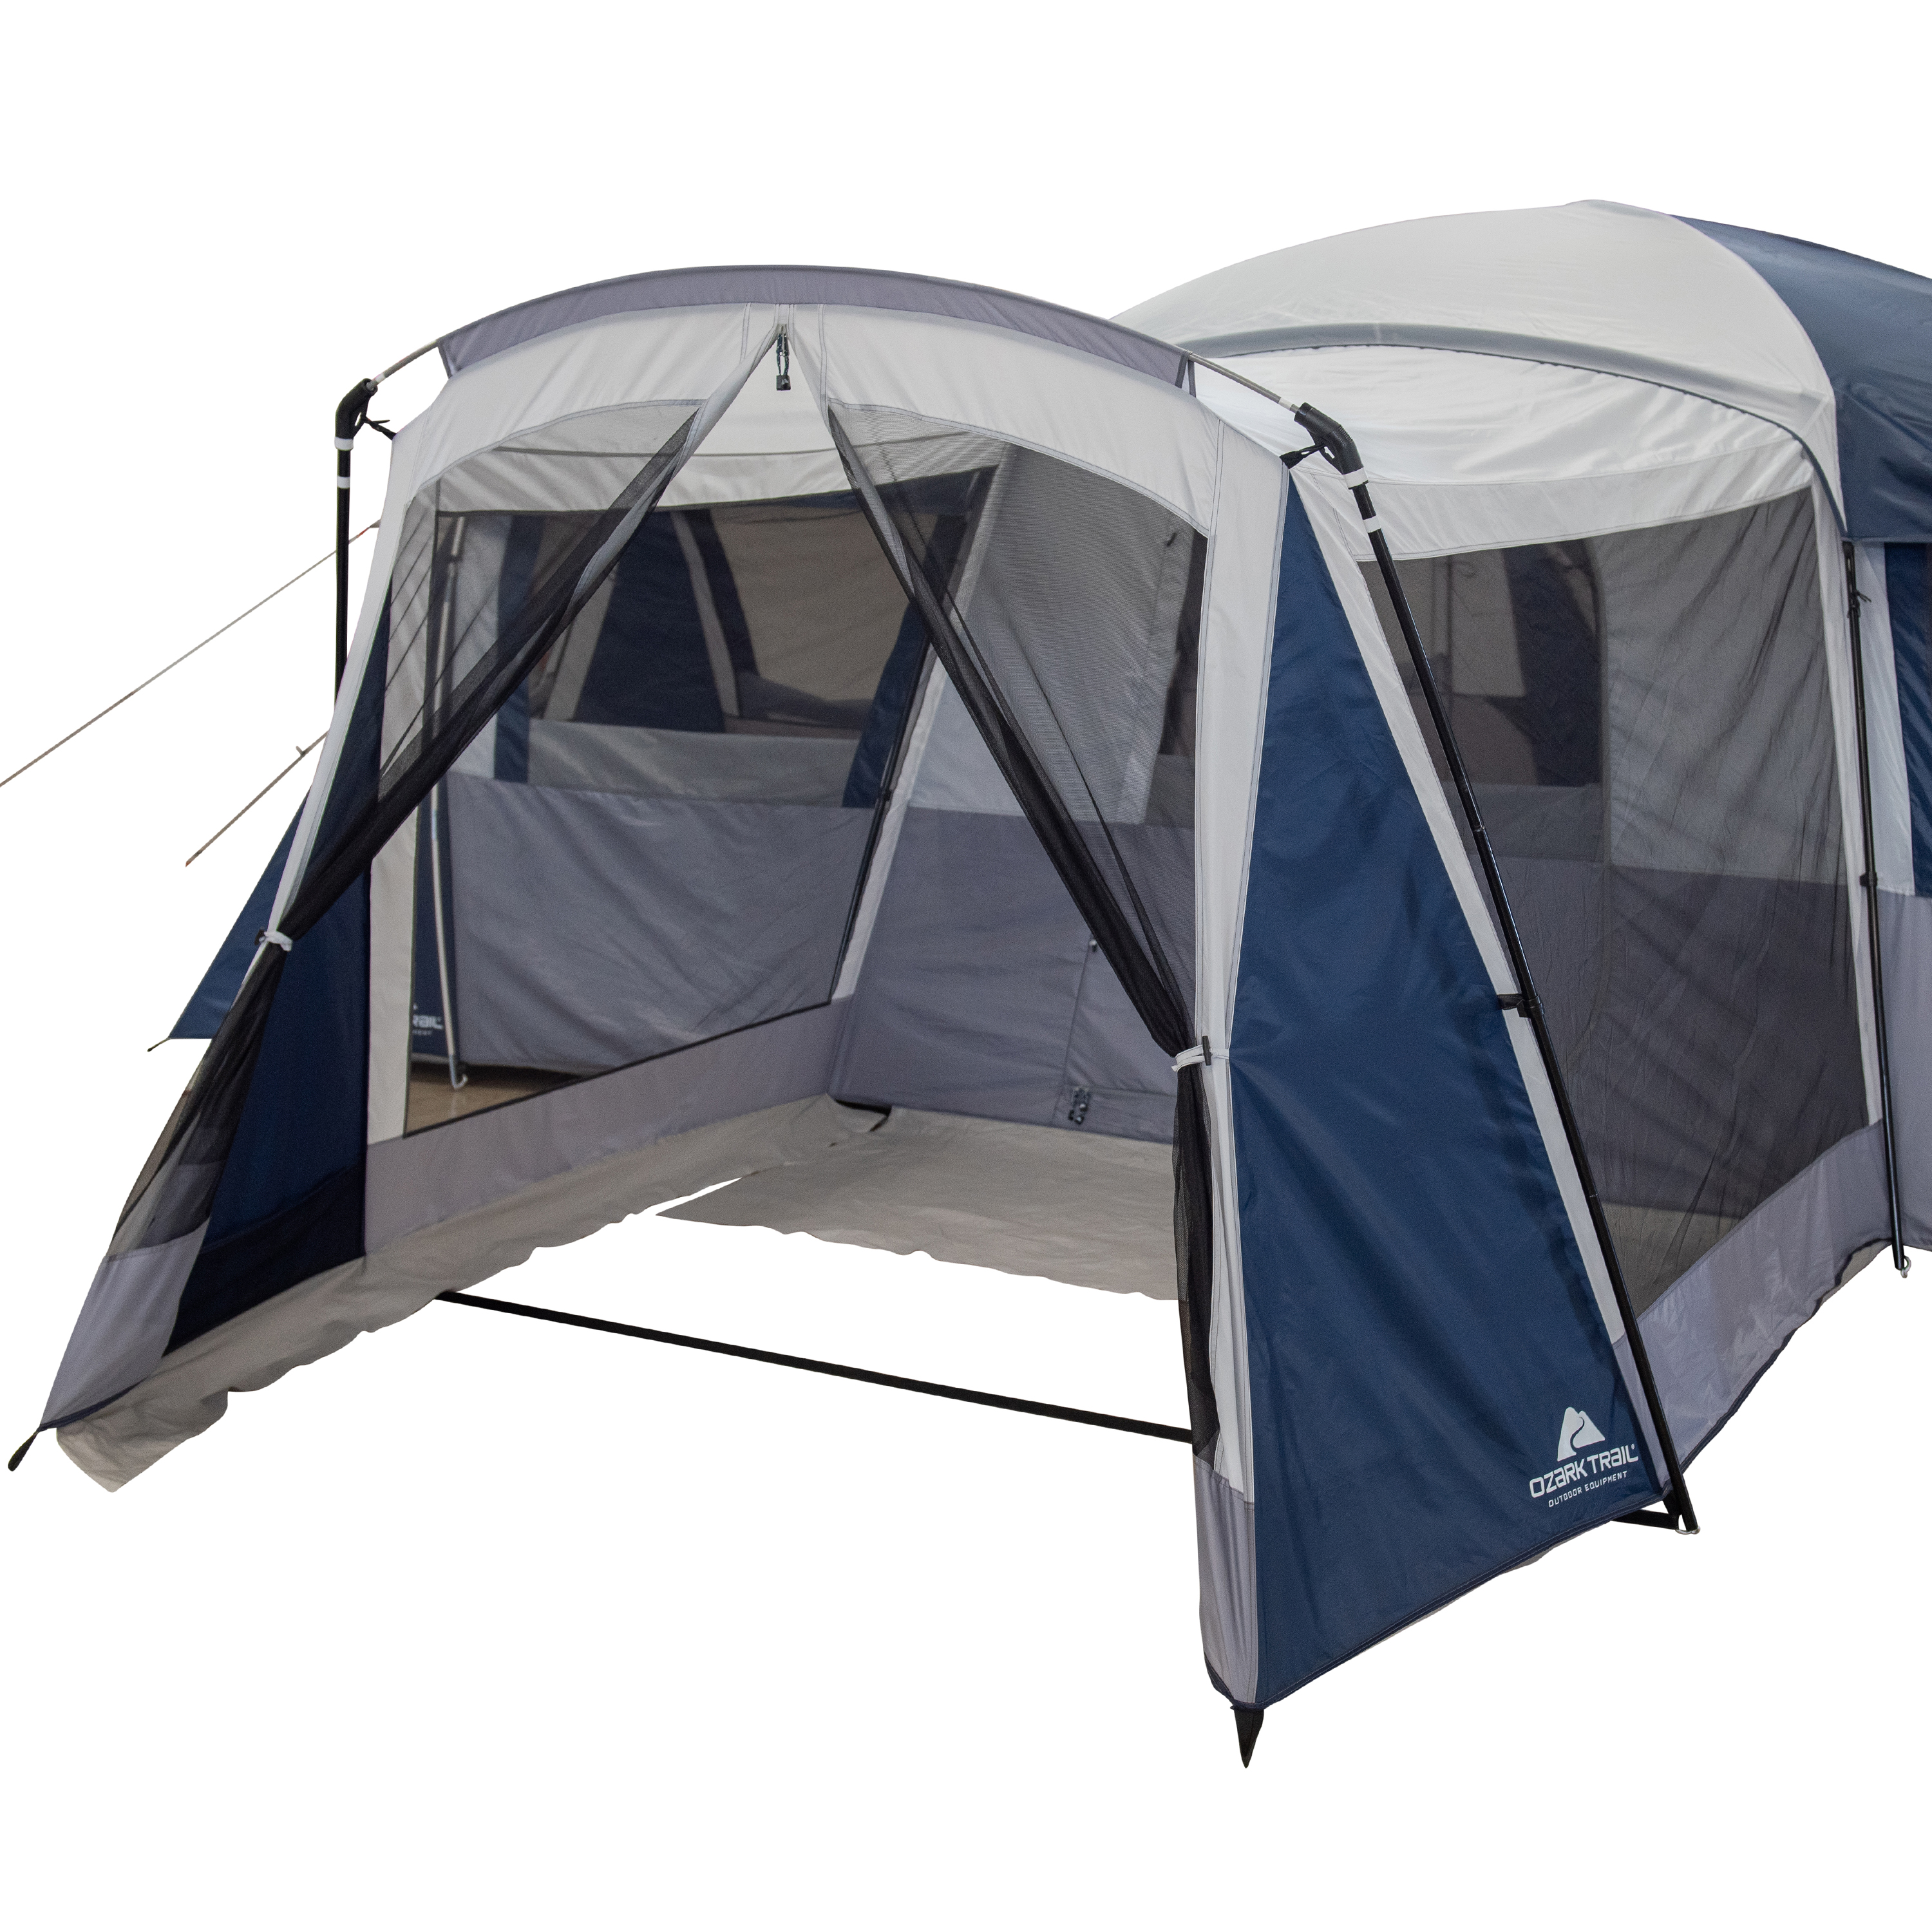 Ozark Trail Hazel Creek 20-Person Star Tent, with Screen Room - image 3 of 16